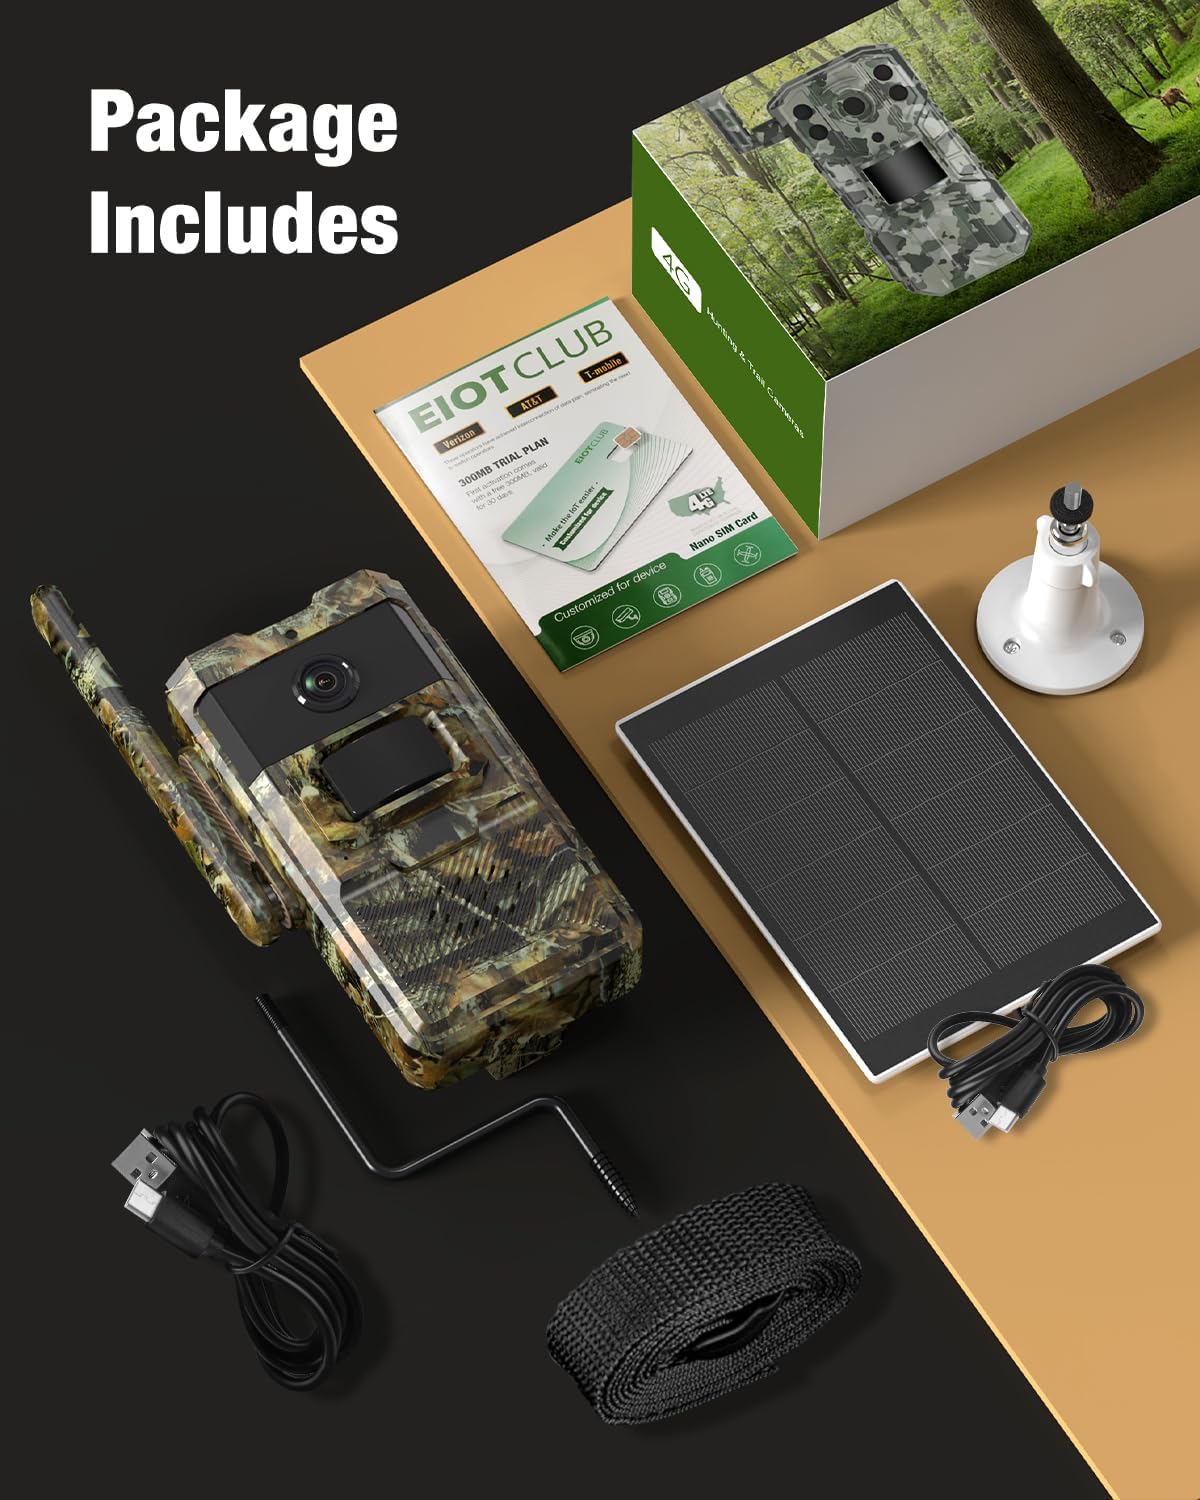 4G LTE Cellular Trail Camera Package Includes 